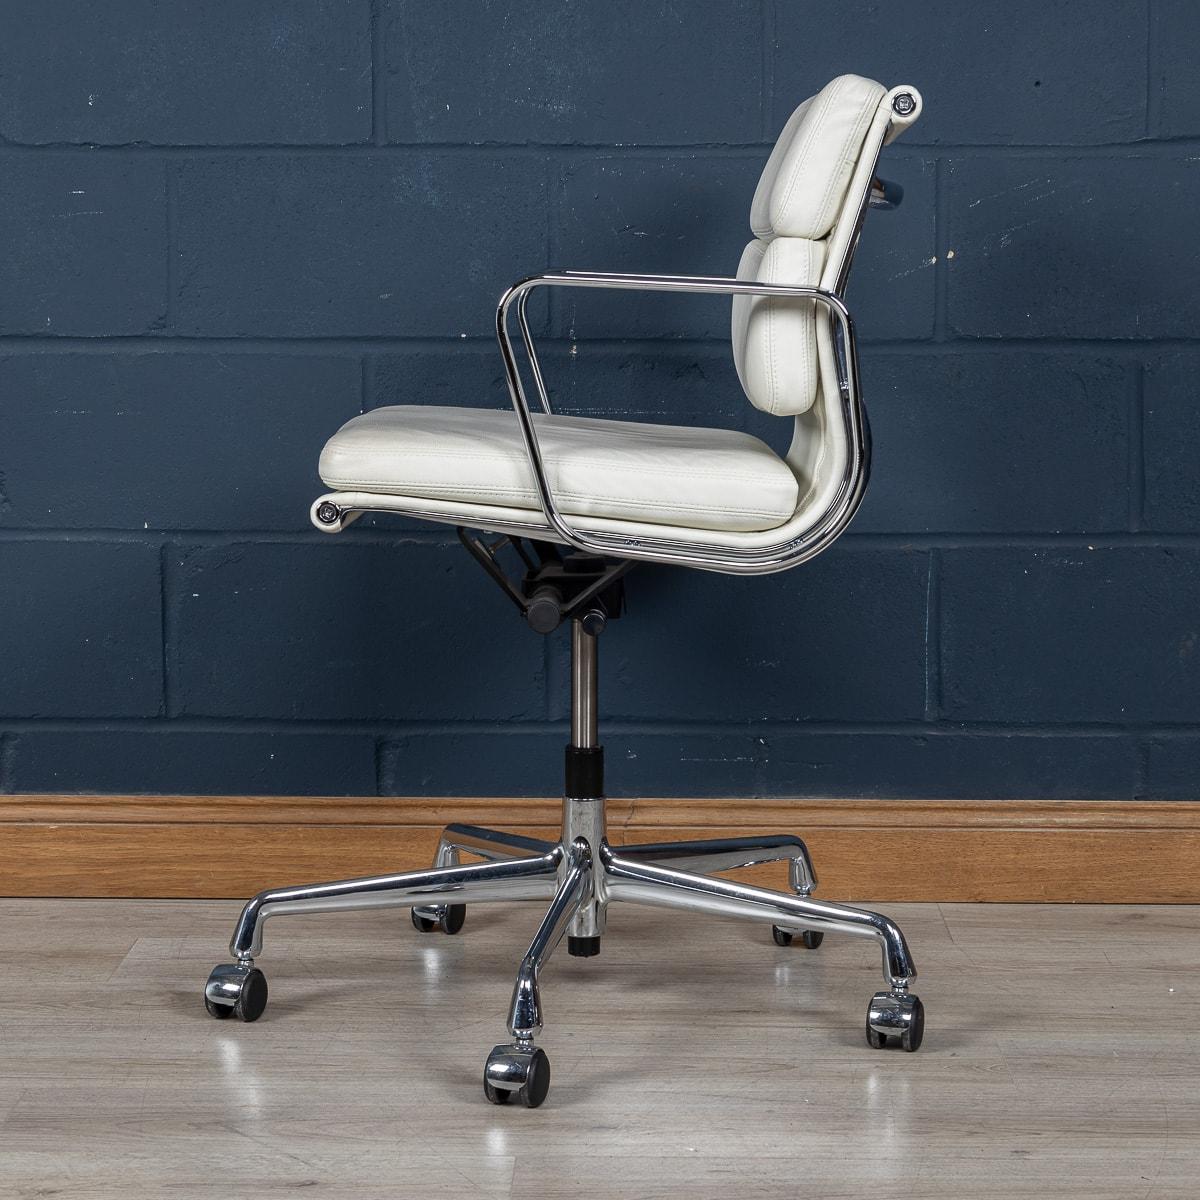 A stunning Eames chair by Vitra, of recent manufacture, in a delightful full white “snow“ leather upholstery. The white contrasts magnificently with the polished metal finish and stands on castors. Height adjustable and reclinable, the chair offers